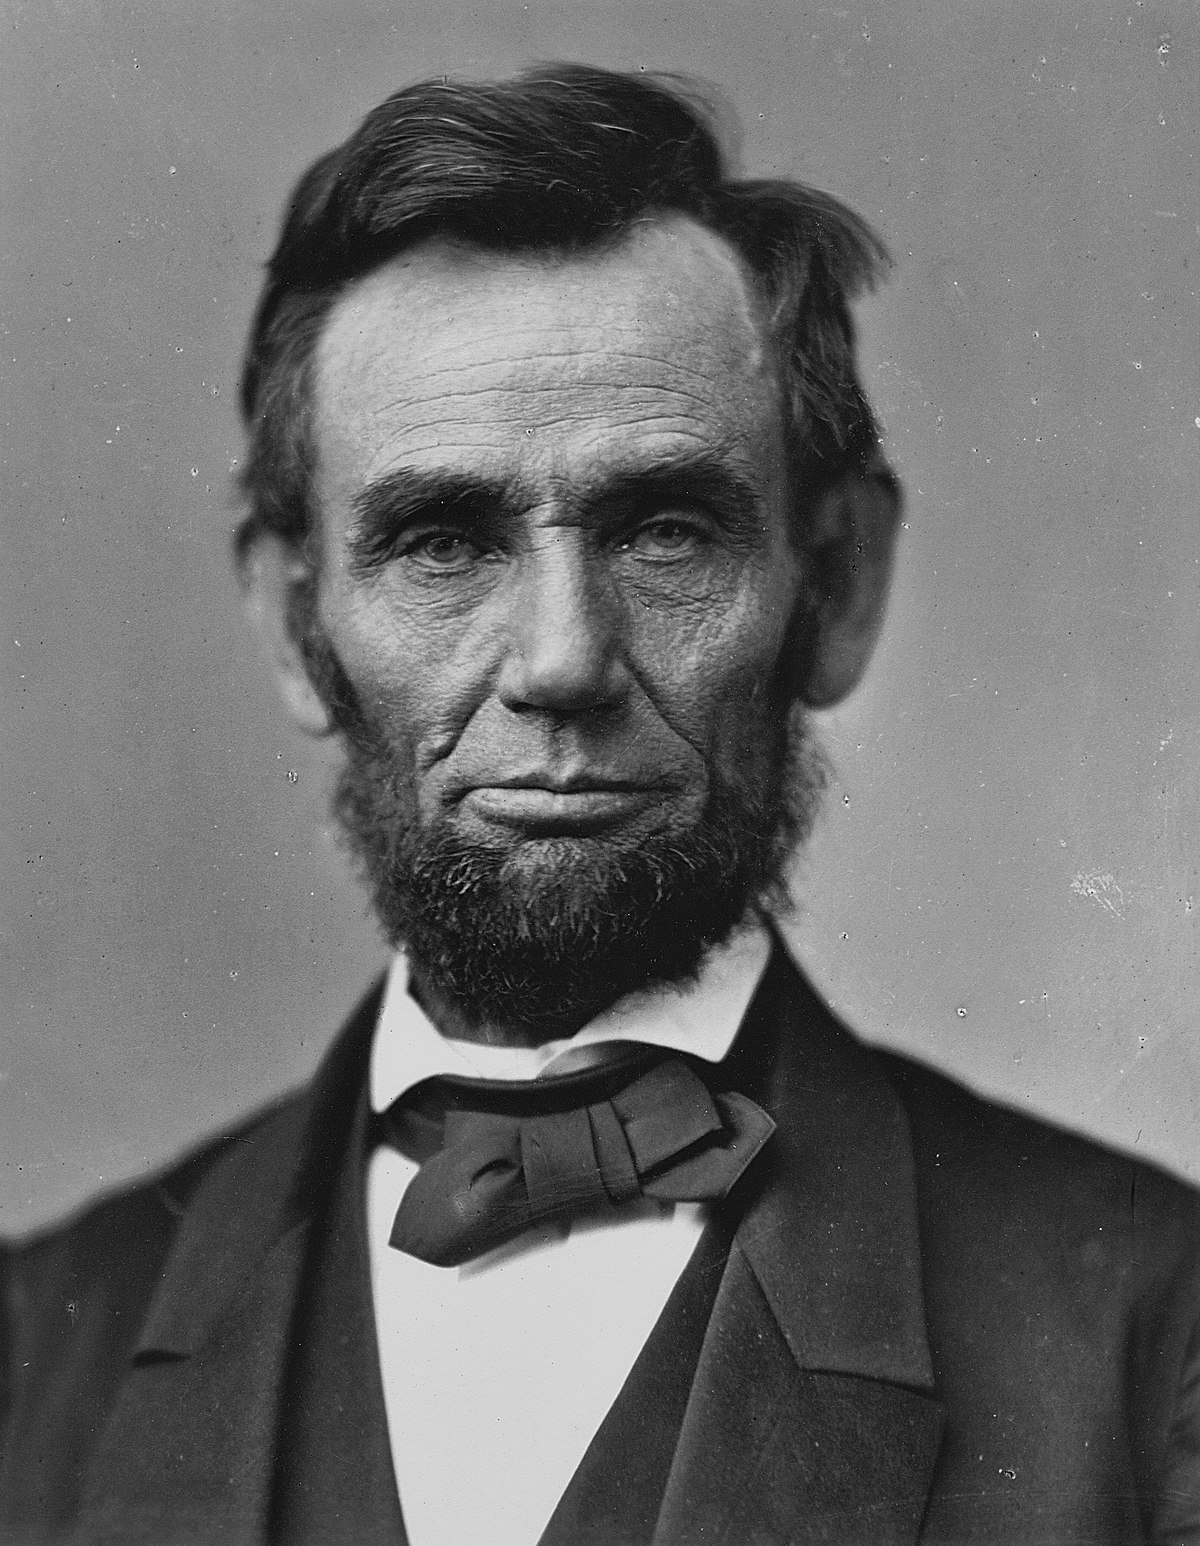 National hero of United States of America - Abraham Lincoln